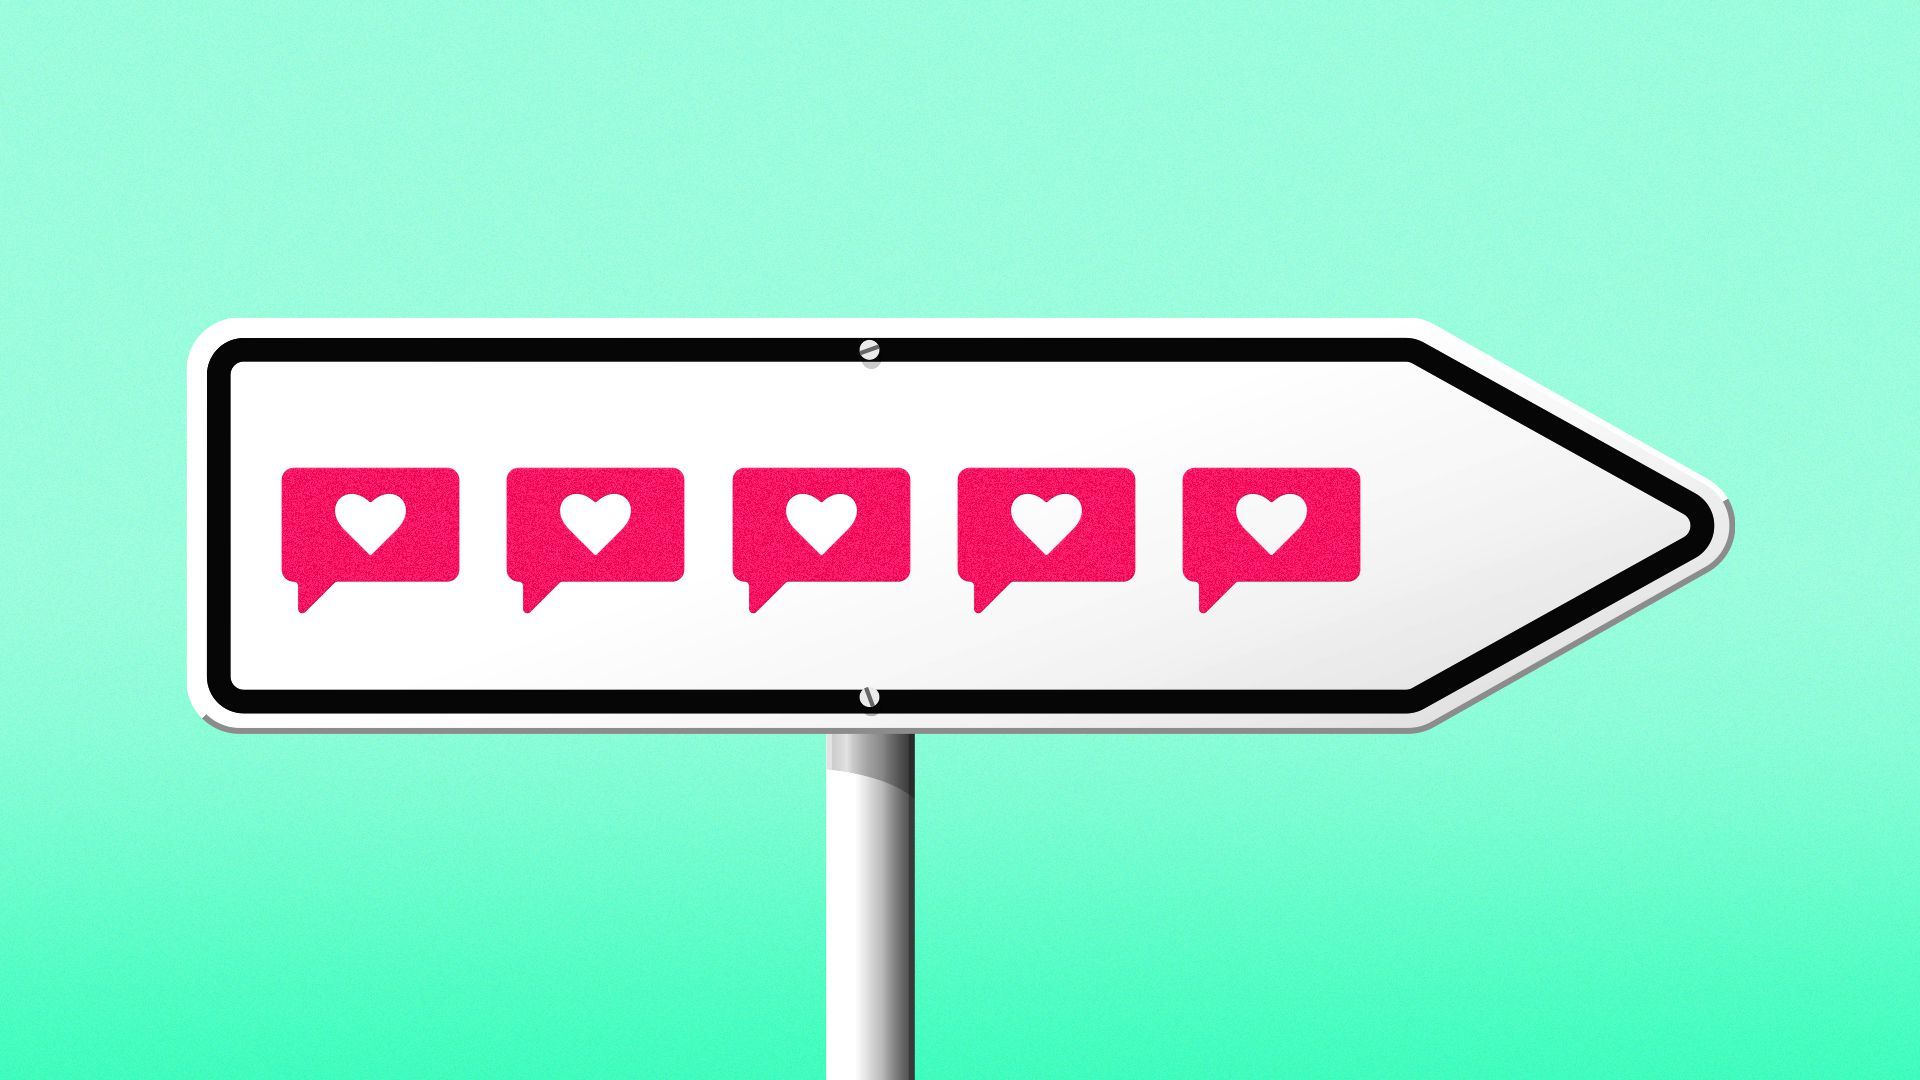 Illustration of a direction sign with 5 social like icons.